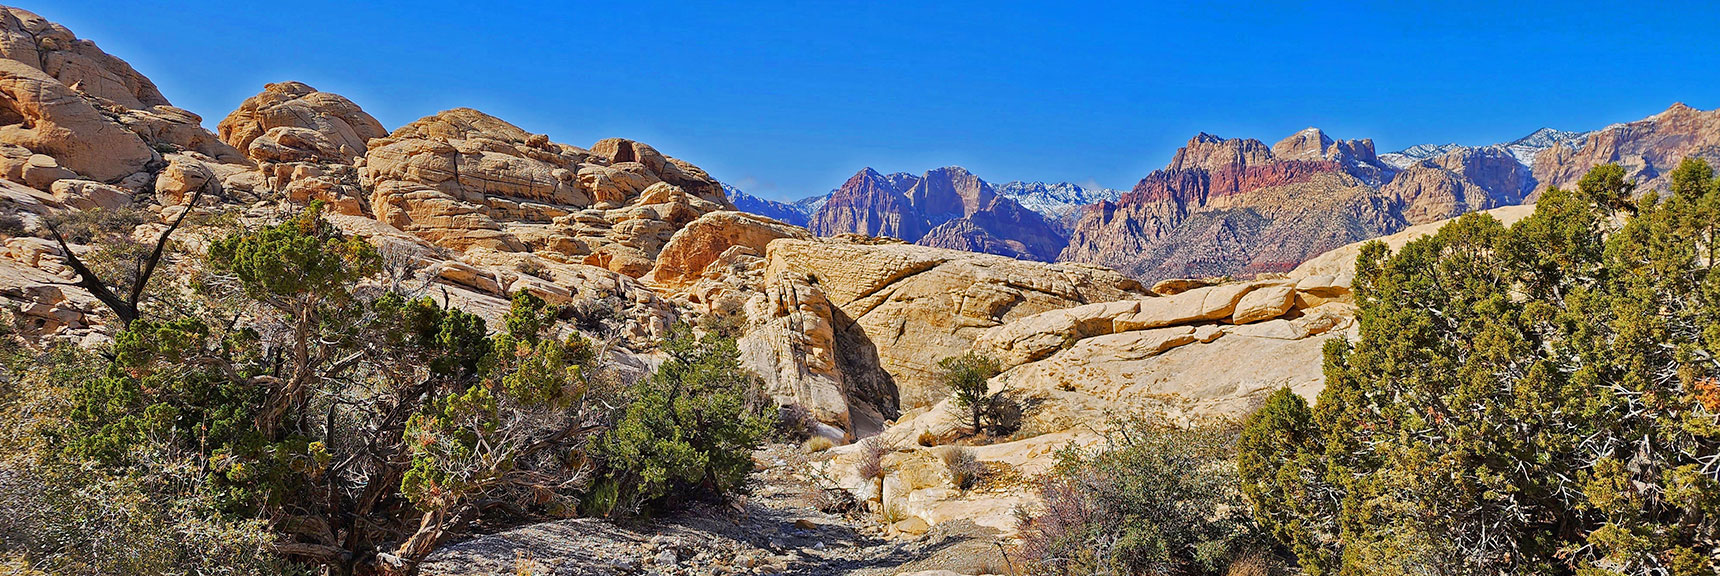 Rainbow Mt and Bridge Mt Appear in the Distance Beyond the Canyon | Ash Canyon to Calico Tanks | Calico Basin and Red Rock Canyon, Nevada | David Smith | Las Vegas Area Trails